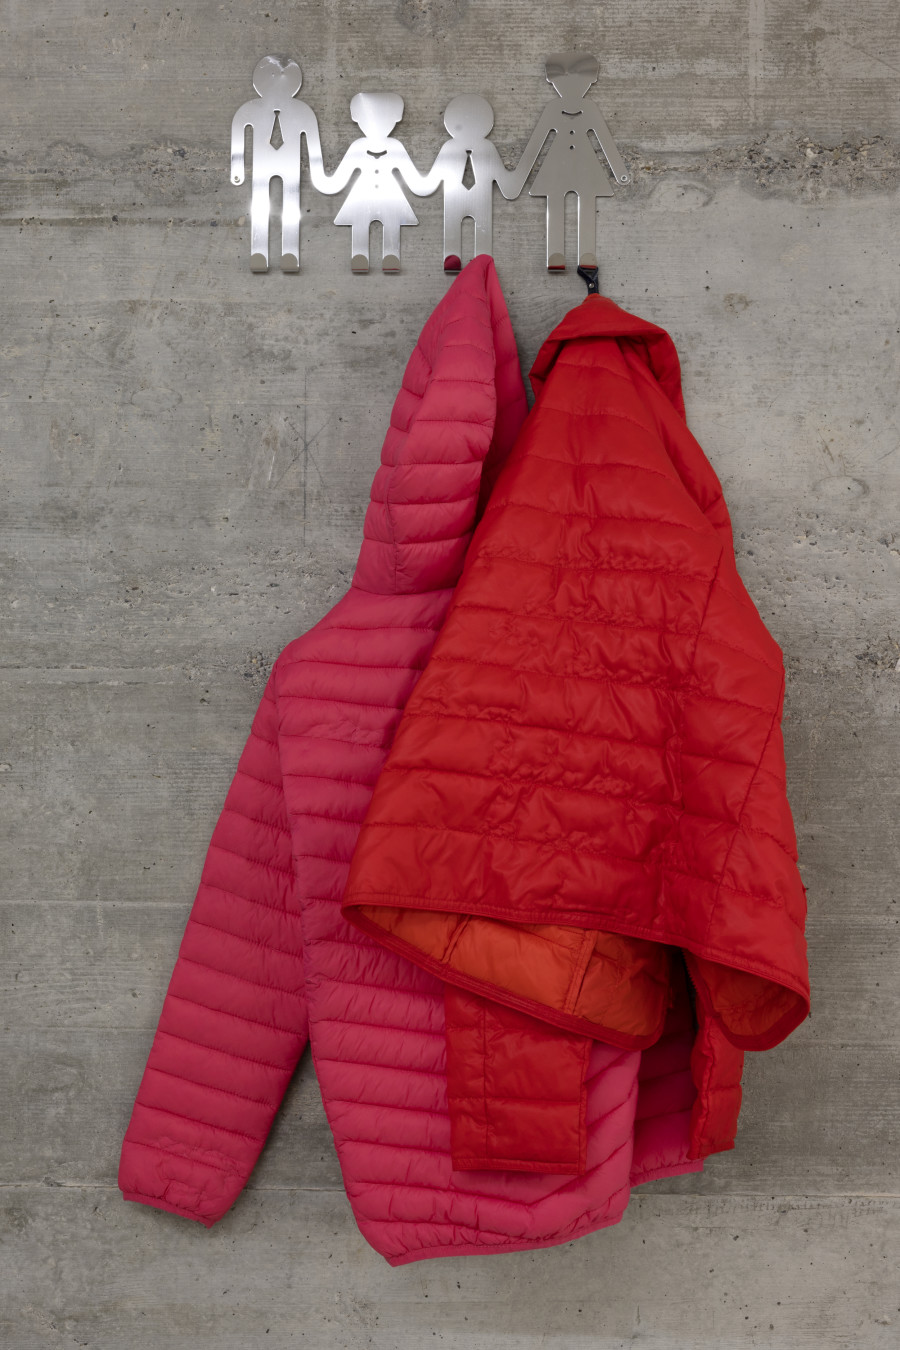 Teo Petruzzi, HappY Family, 2023, puffer jackets, embroidery, door wardrobe, 120 × 53 × 24 cm. Photography: Gina Folly / all images copyright and courtesy of the artist and For, Basel